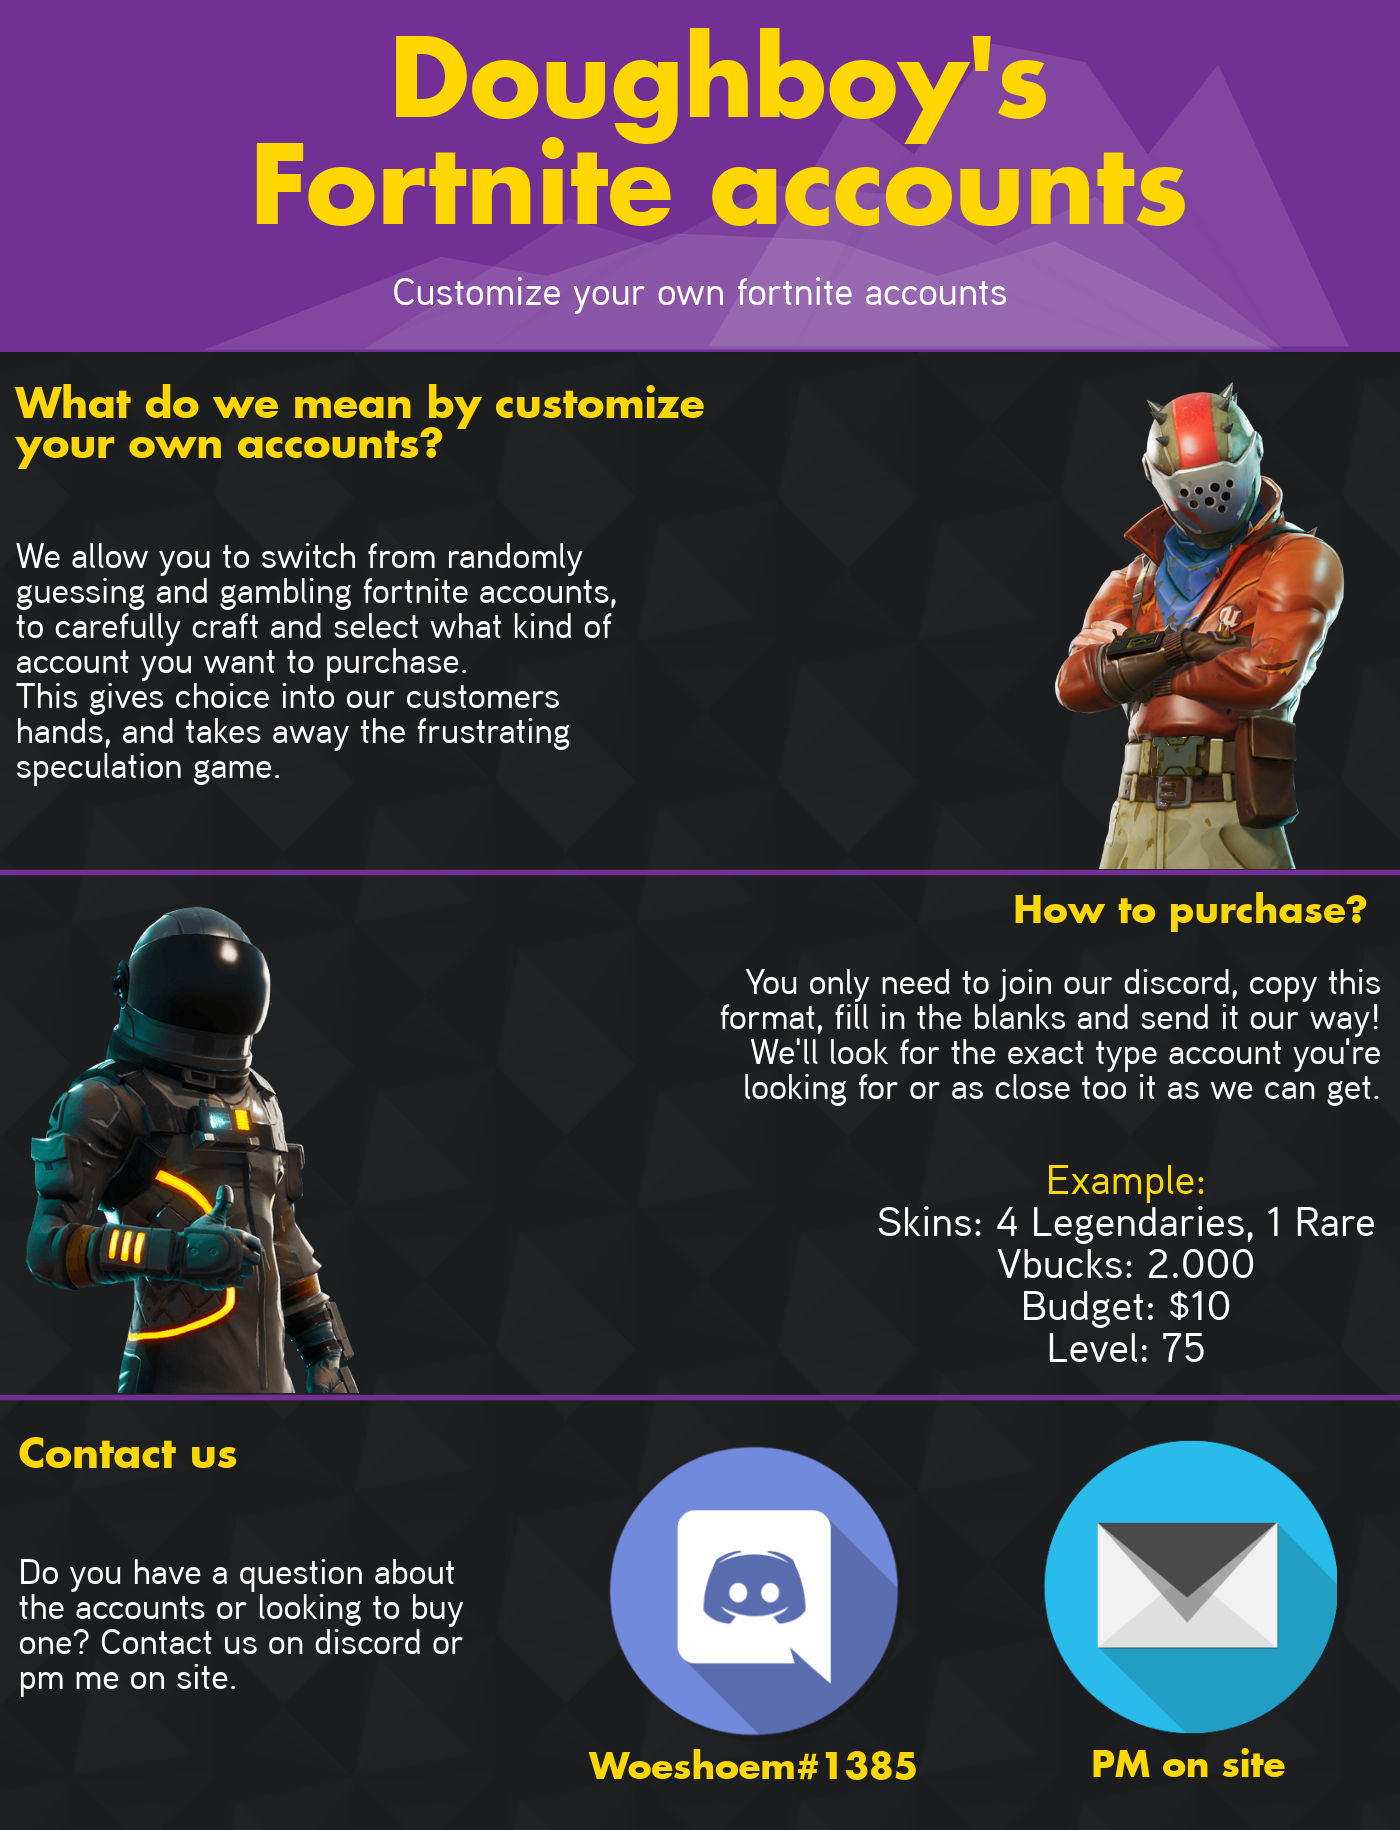 selling high end pc doughboy s custom fortnite accounts fast reliable vouched - discord fortnite fr pc